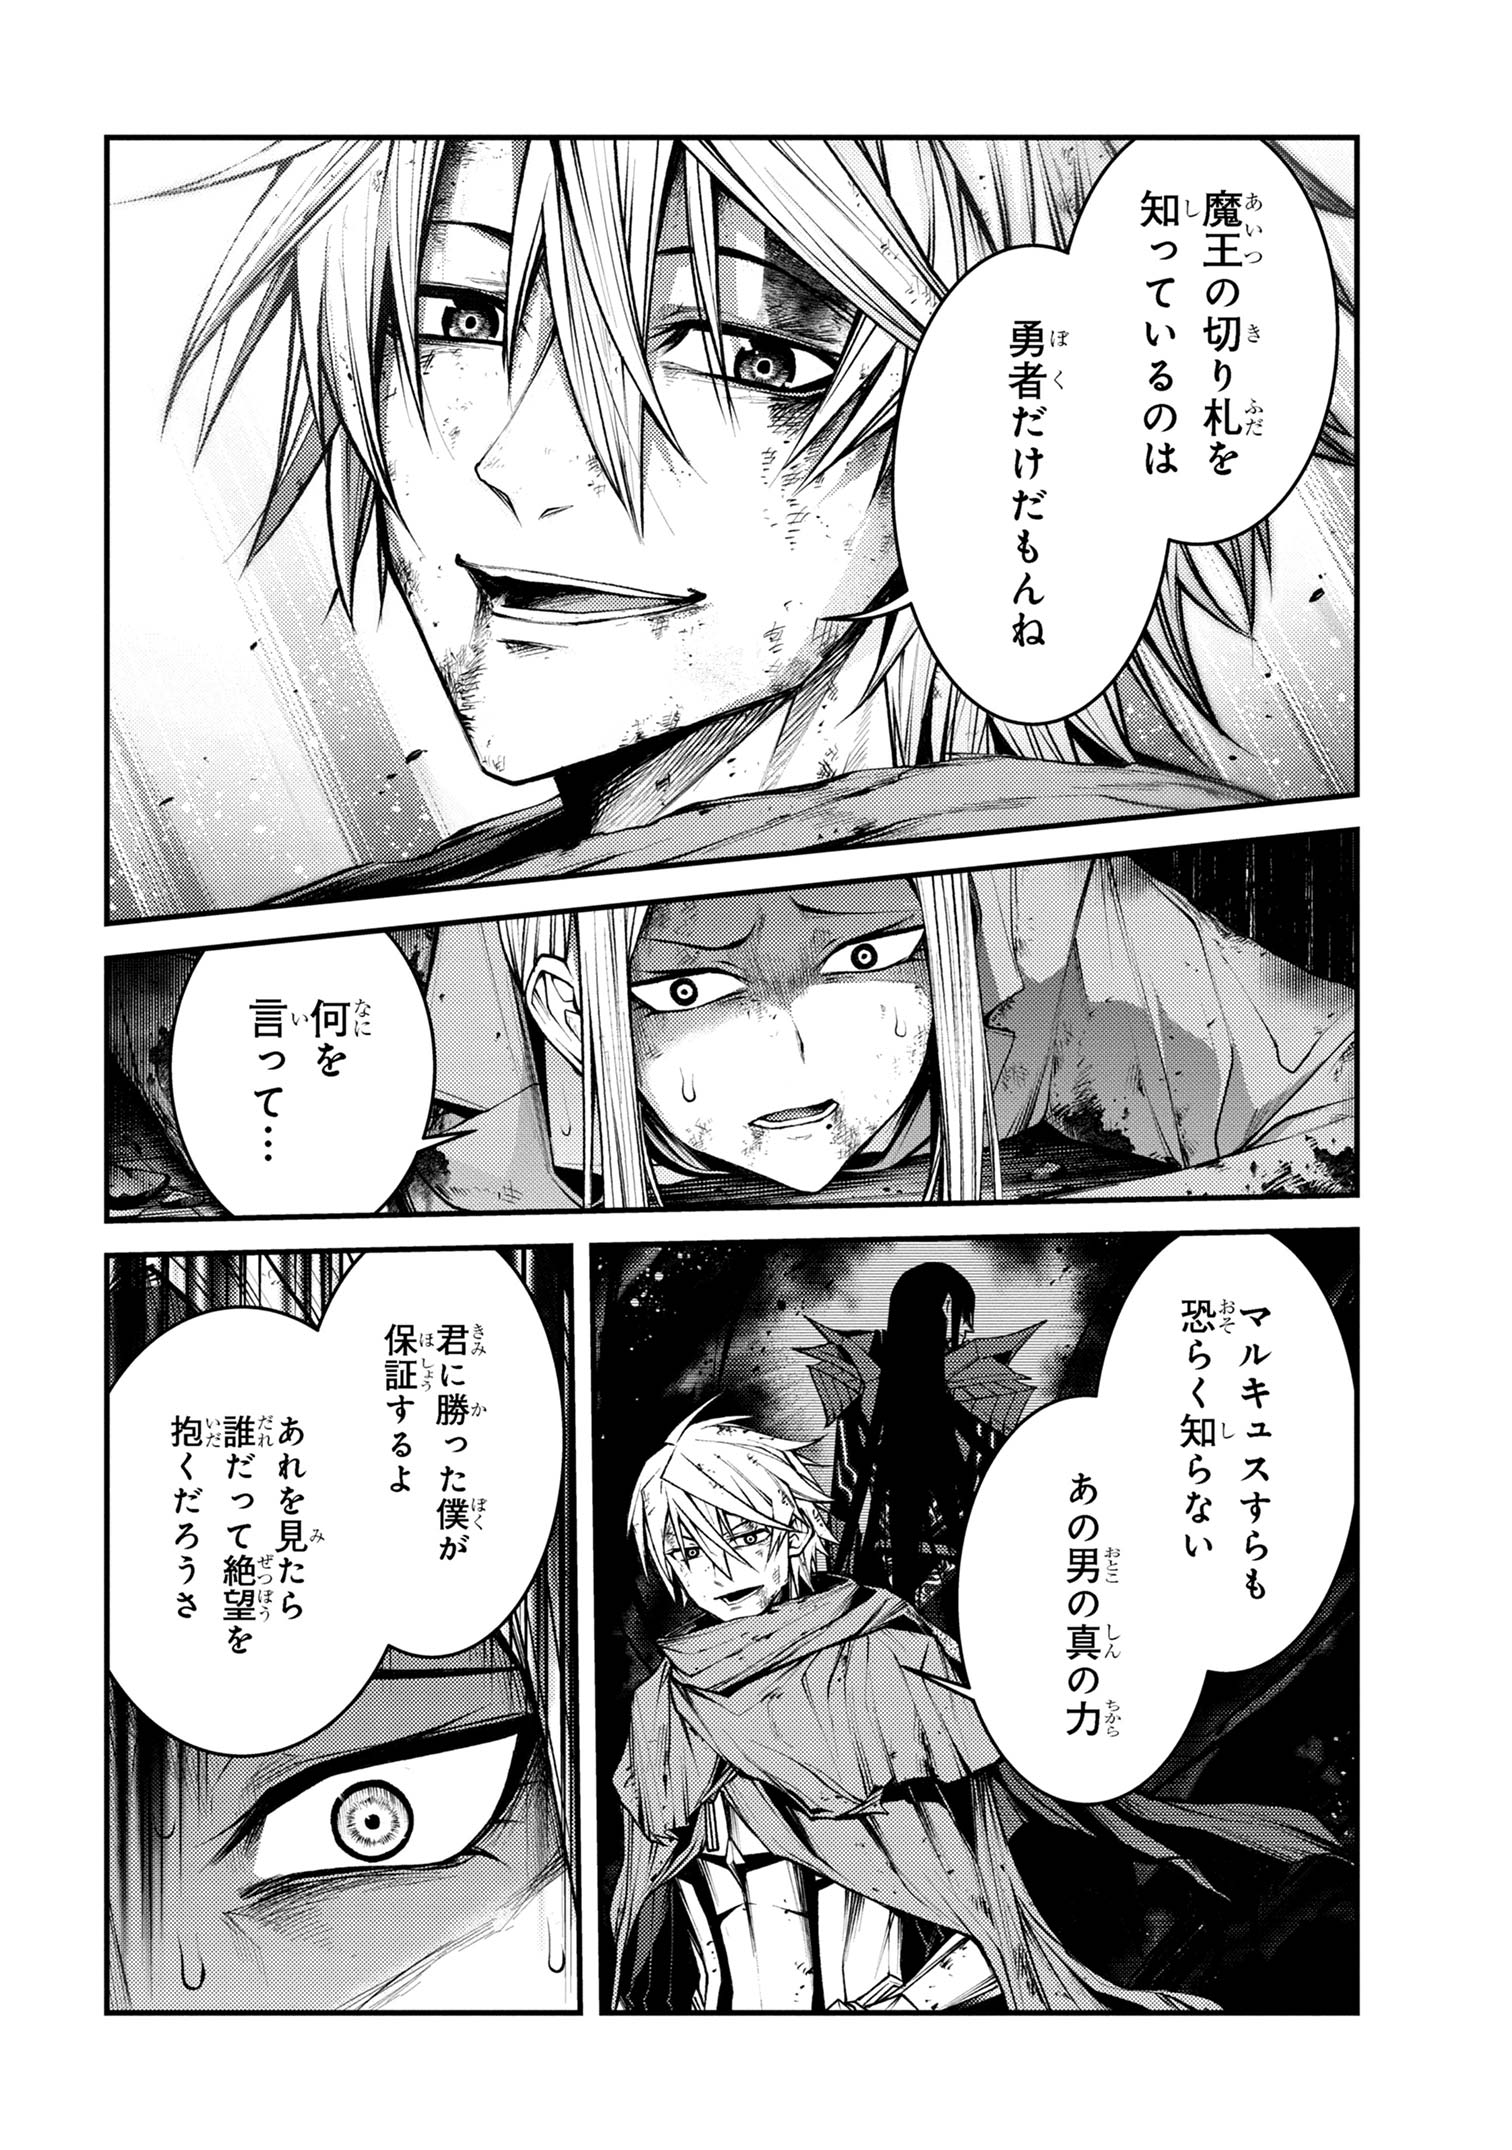 Maou 2099 - Chapter 12.2 - Page 14